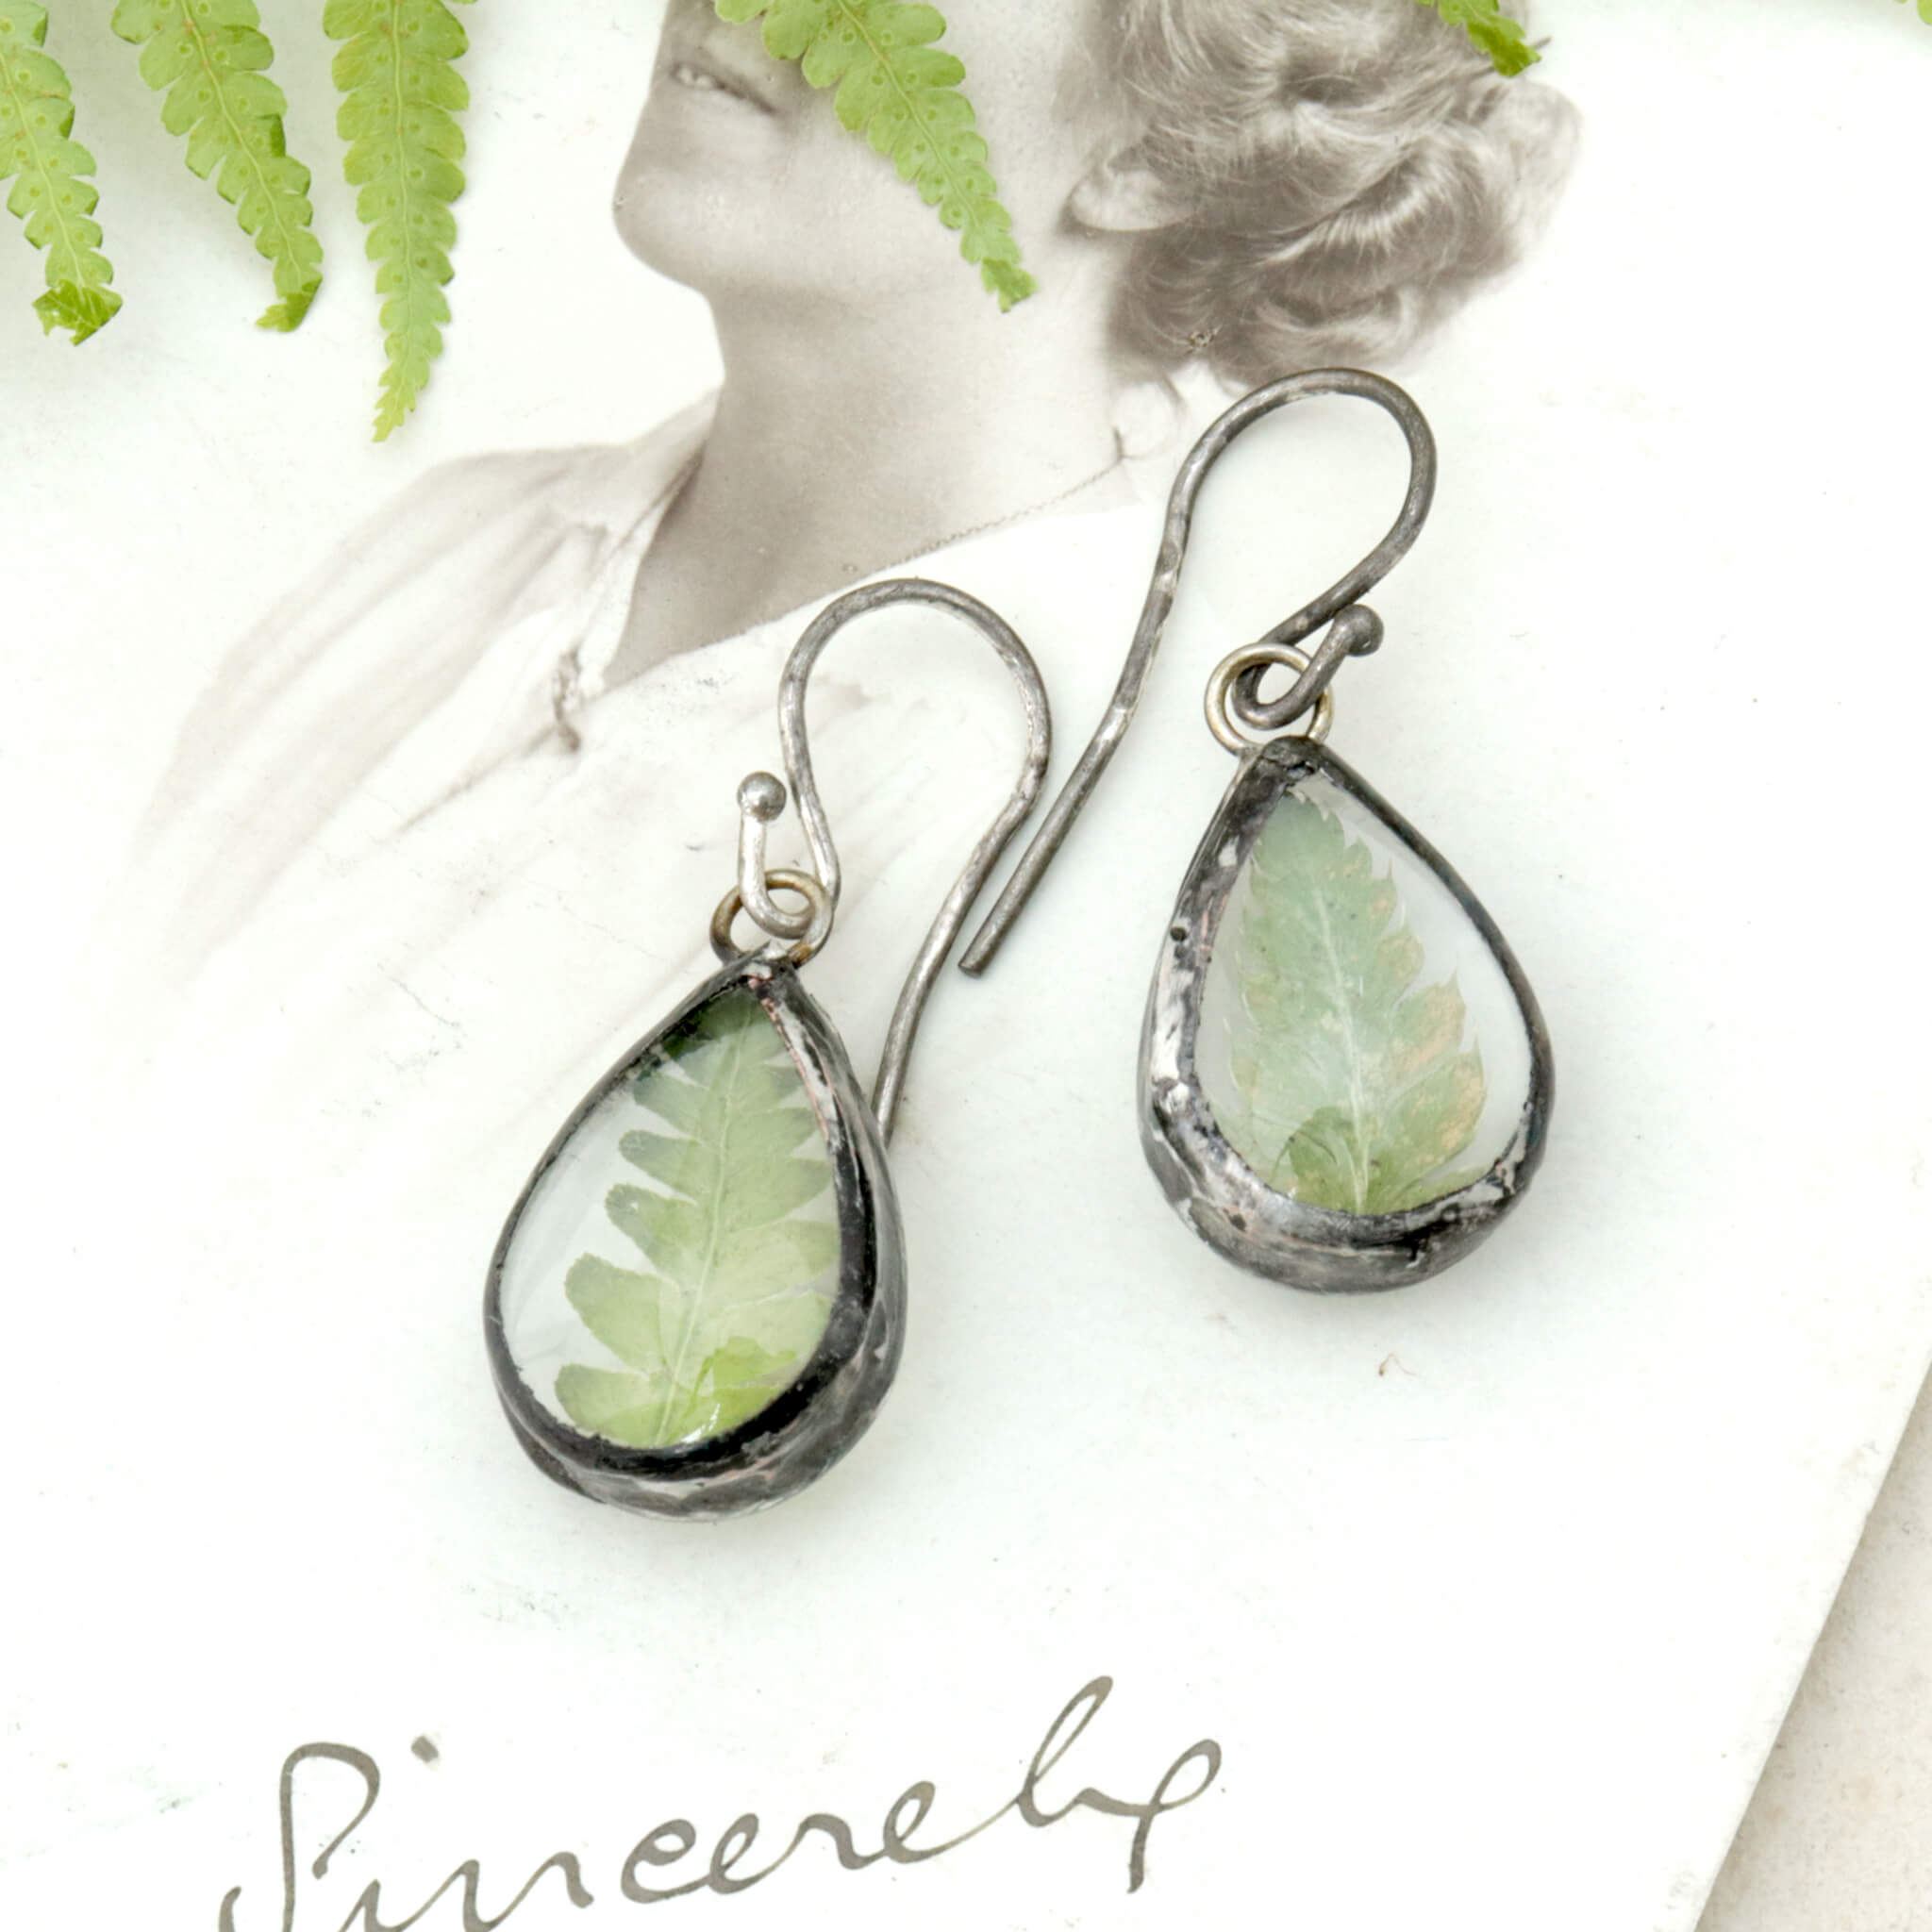 Earrings with real fern lying on an old photo